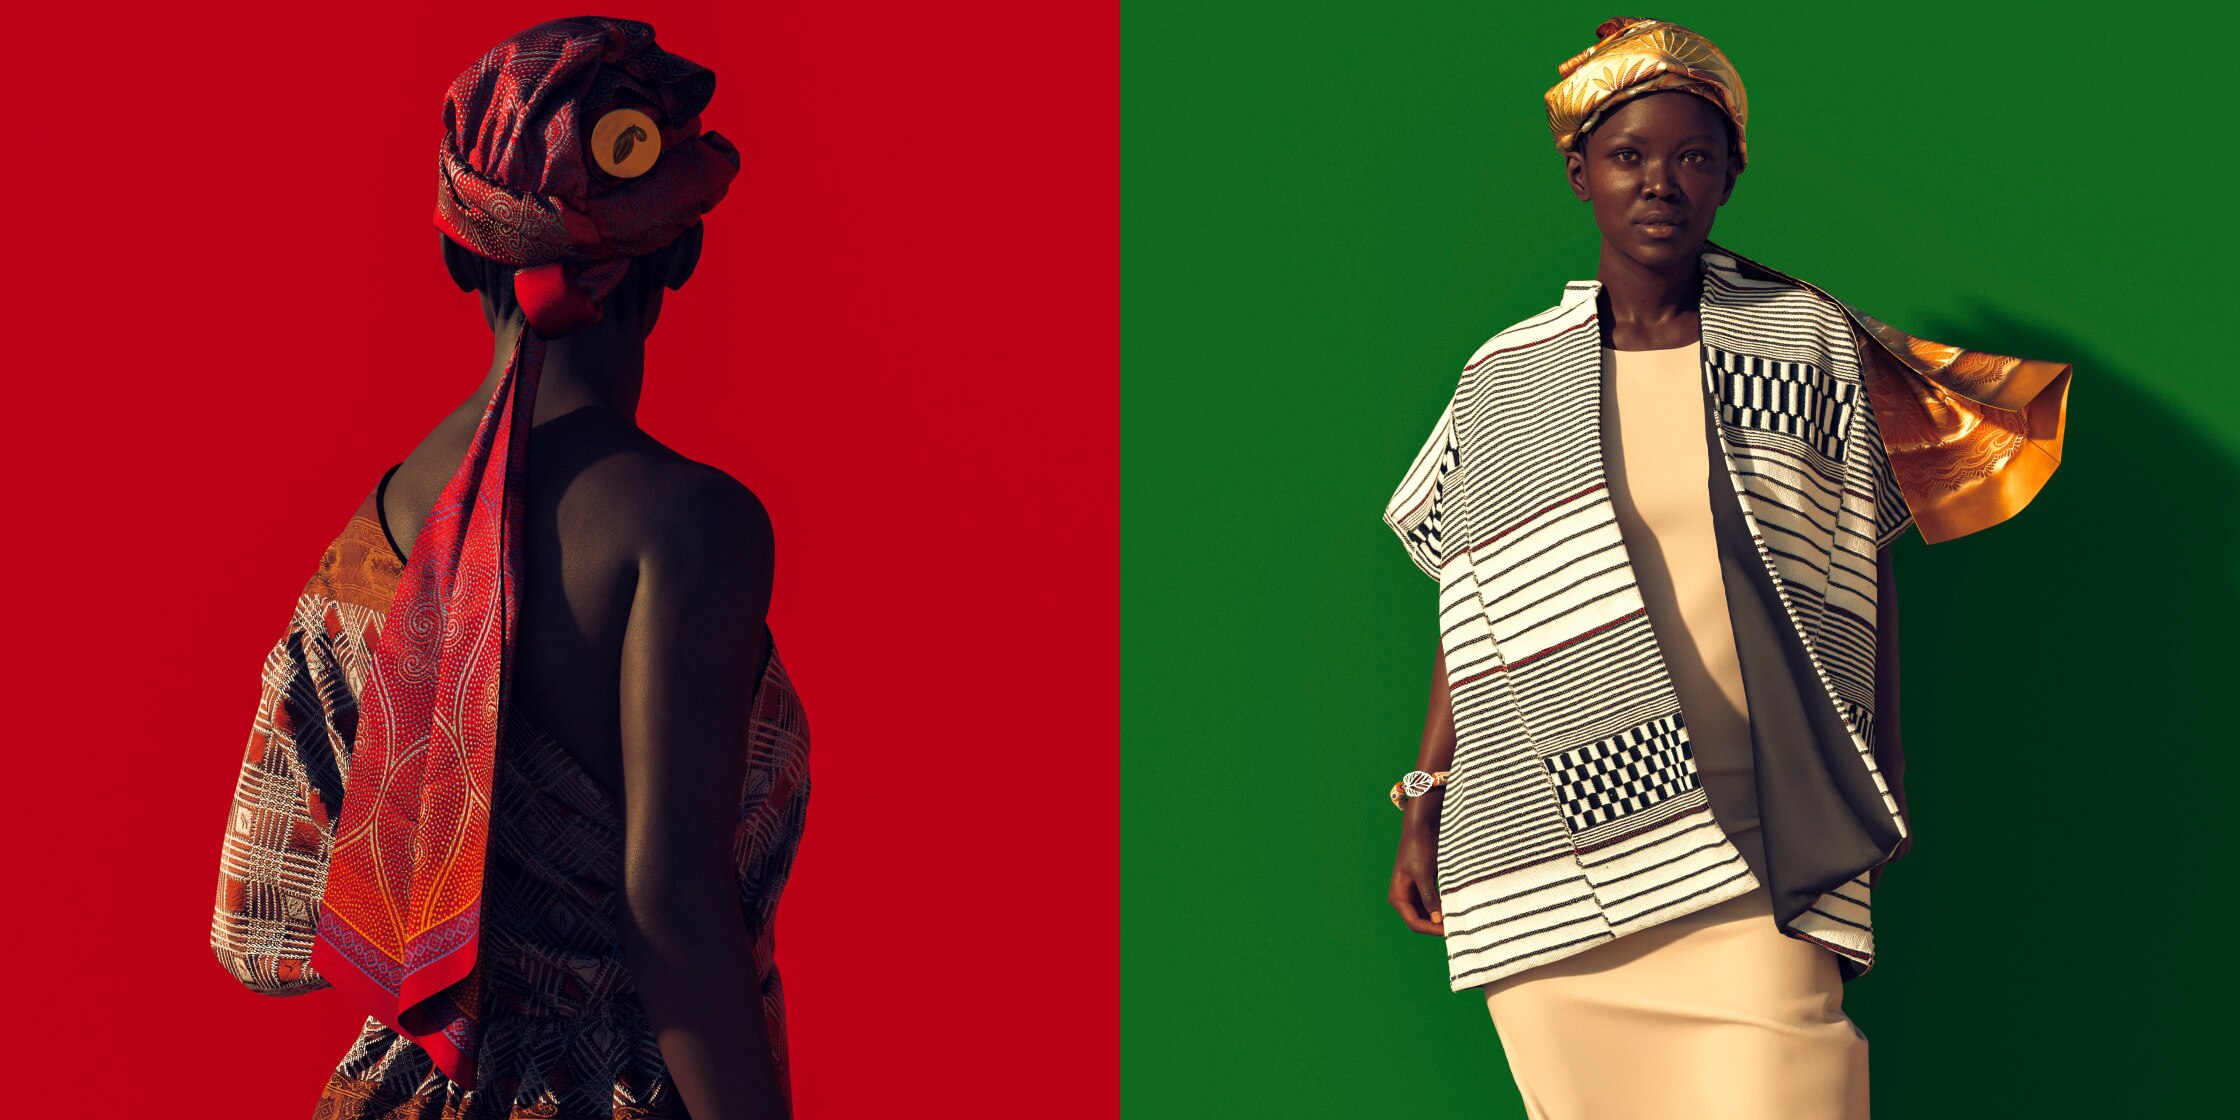 African fashion item on read and green colour block background